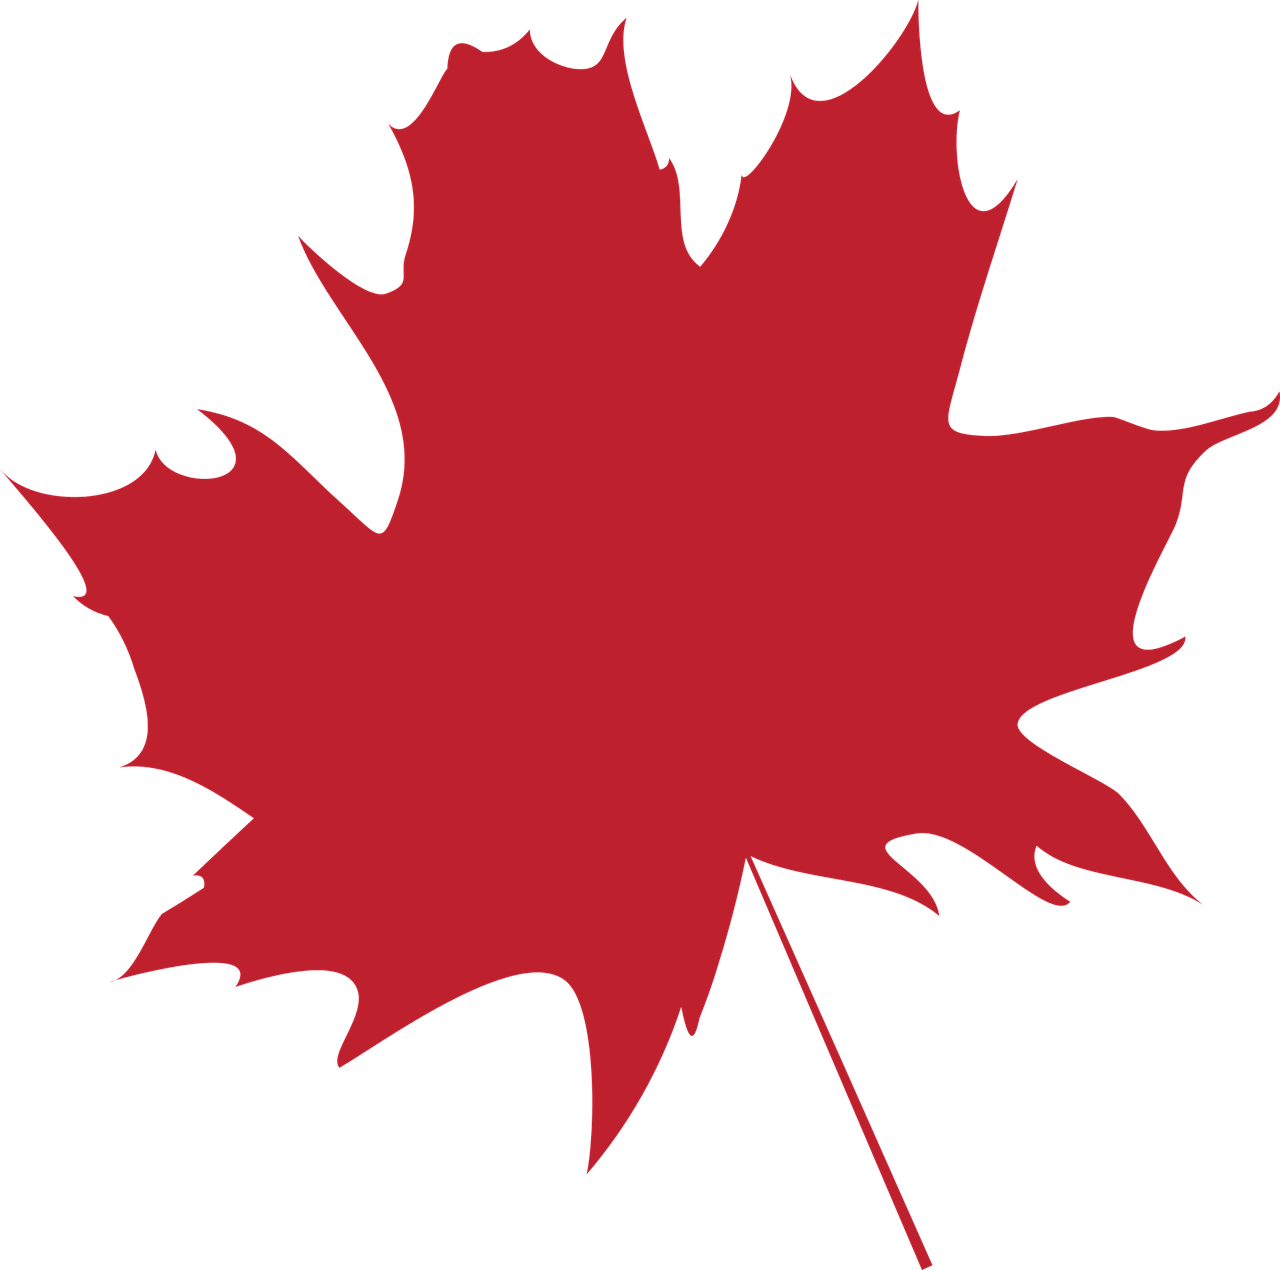 a red maple leaf on a black background, inspired by Masamitsu Ōta, hurufiyya, vectorized, boards of canada album cover, full res, cartoonish and simplistic